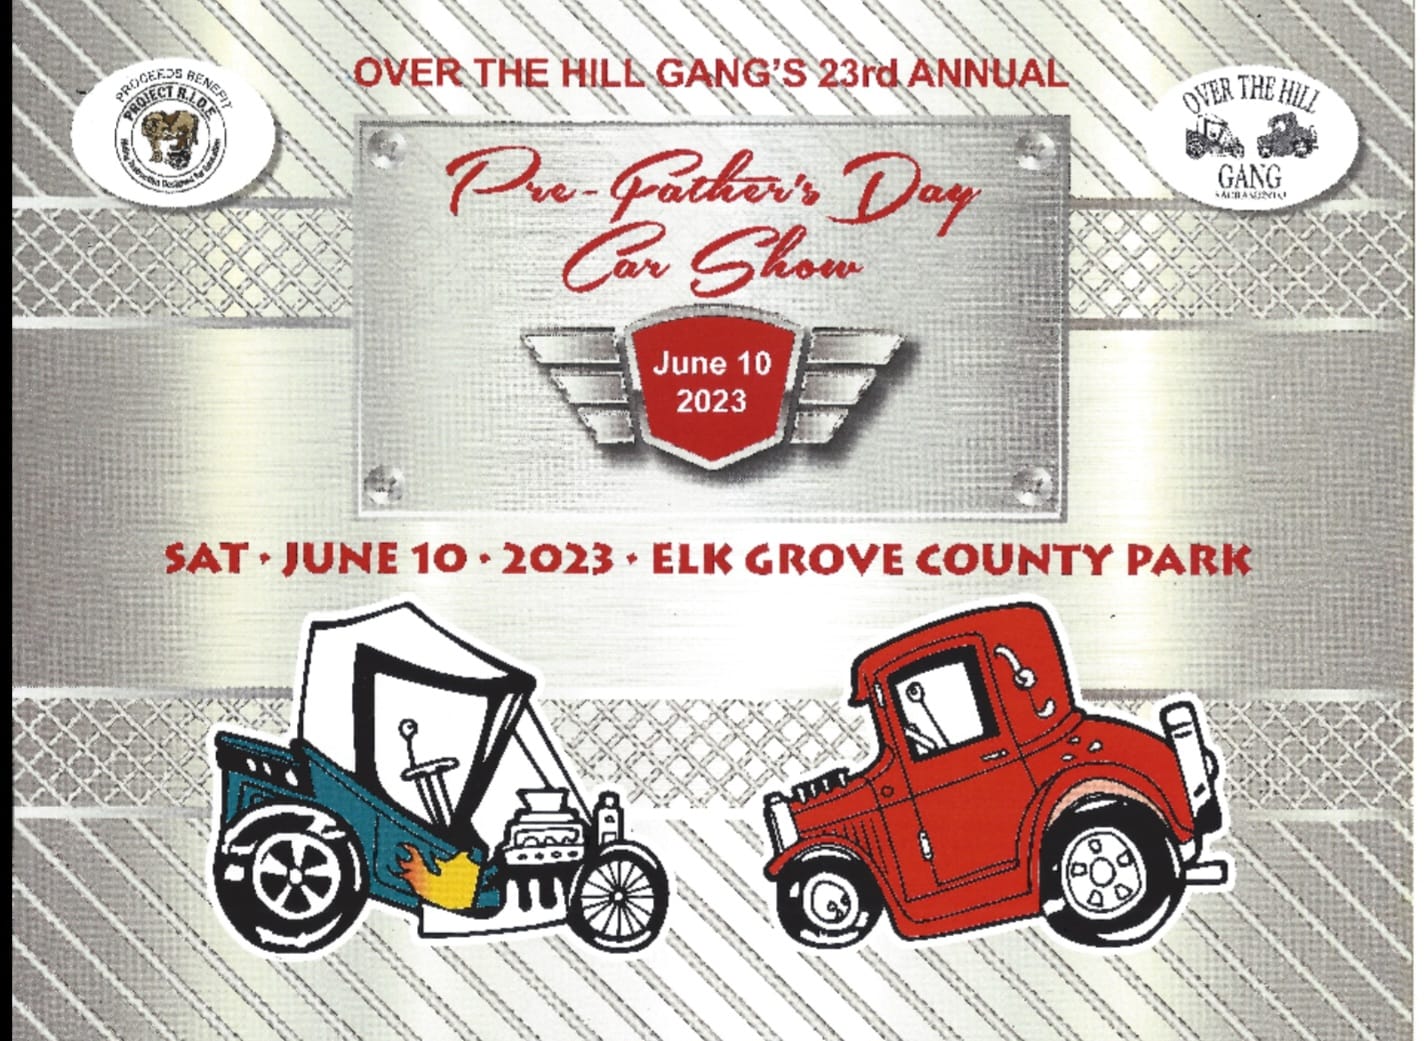 Pre Father's Day Car Show